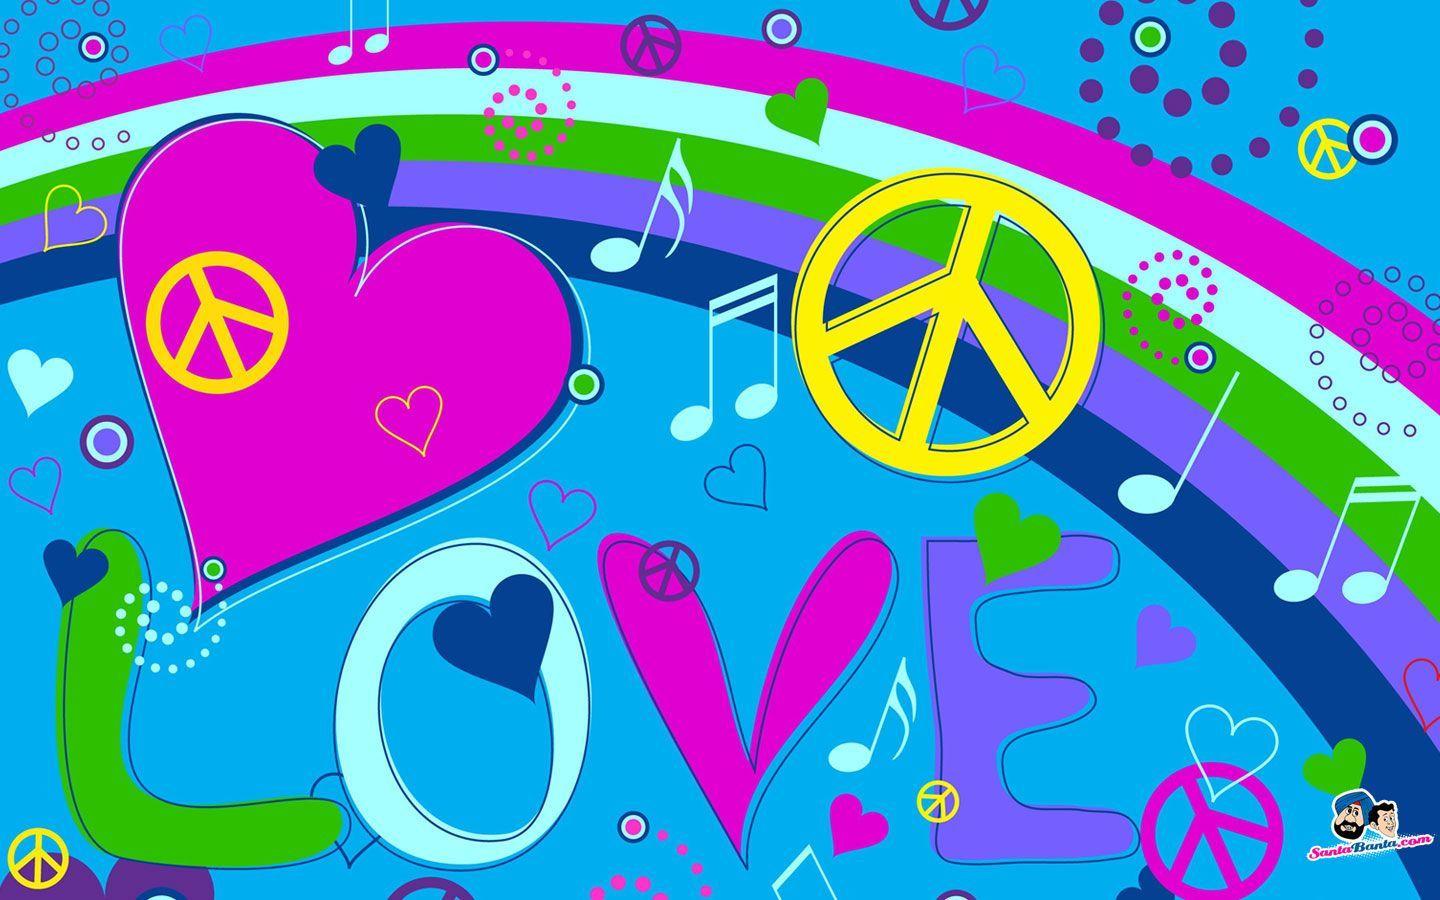 peace love and rock n roll. PEACE, LOVE AND ROCK´n´ROLL. Blessings